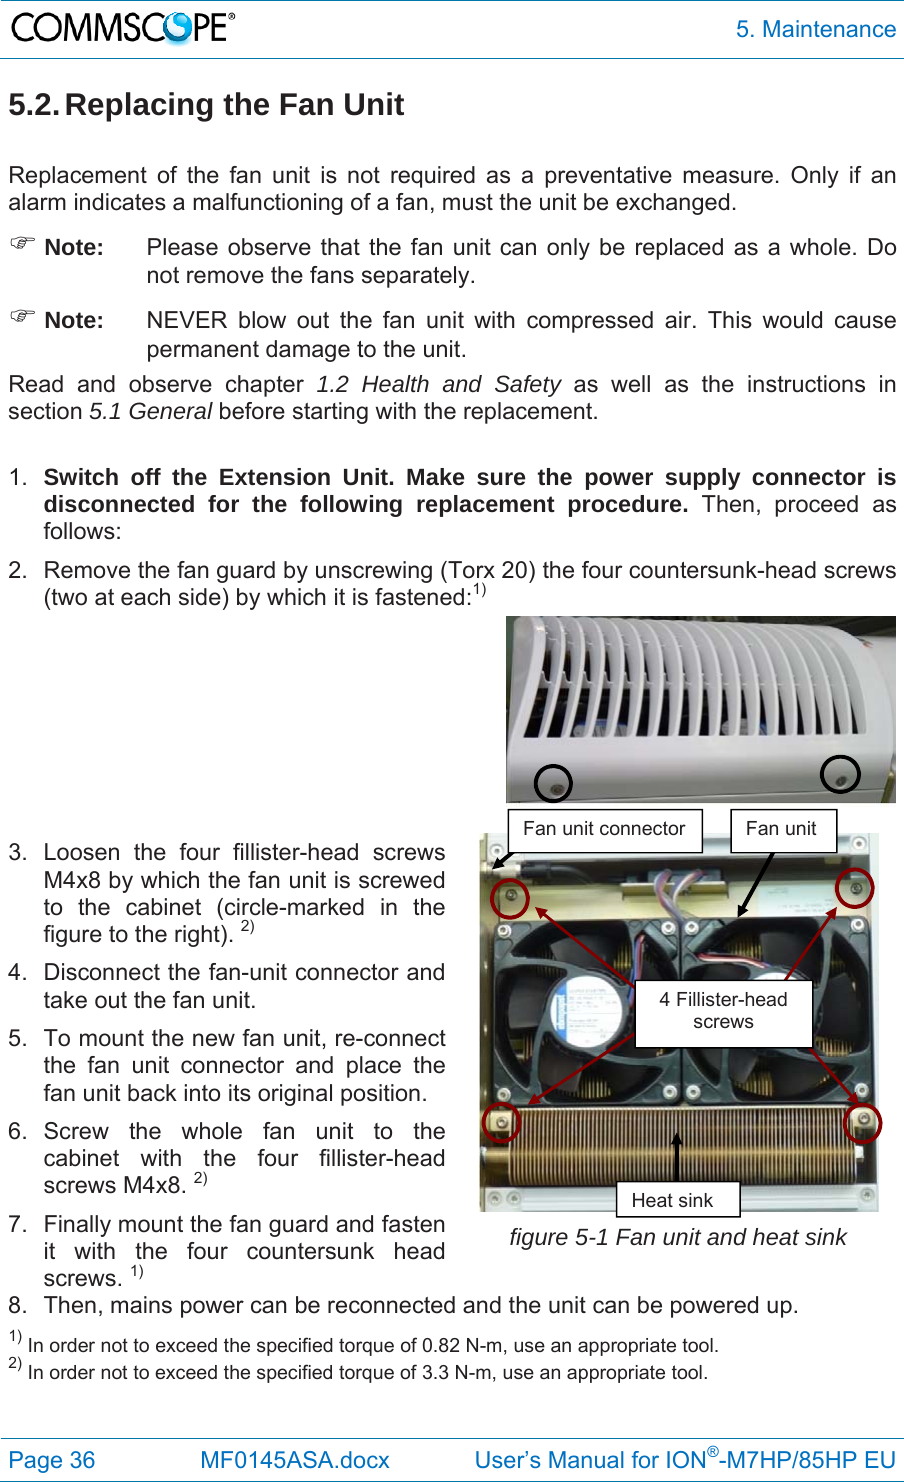  5. Maintenance Page 36  MF0145ASA.docx             User’s Manual for ION®-M7HP/85HP EU 5.2. Replacing the Fan Unit  Replacement of the fan unit is not required as a preventative measure. Only if an alarm indicates a malfunctioning of a fan, must the unit be exchanged.  Note:  Please observe that the fan unit can only be replaced as a whole. Do not remove the fans separately.  Note:  NEVER blow out the fan unit with compressed air. This would cause permanent damage to the unit. Read and observe chapter 1.2 Health and Safety as well as the instructions in section 5.1 General before starting with the replacement.   1.  Switch off the Extension Unit. Make sure the power supply connector is disconnected for the following replacement procedure. Then, proceed as follows: 2.  Remove the fan guard by unscrewing (Torx 20) the four countersunk-head screws (two at each side) by which it is fastened:1)    3. Loosen the four fillister-head screws M4x8 by which the fan unit is screwed to the cabinet (circle-marked in the figure to the right). 2) 4.  Disconnect the fan-unit connector and take out the fan unit. 5.  To mount the new fan unit, re-connect the fan unit connector and place the fan unit back into its original position. 6. Screw the whole fan unit to the cabinet with the four fillister-head screws M4x8. 2) 7.  Finally mount the fan guard and fasten it with the four countersunk head screws. 1) figure 5-1 Fan unit and heat sink 8.  Then, mains power can be reconnected and the unit can be powered up. 1) In order not to exceed the specified torque of 0.82 N-m, use an appropriate tool. 2) In order not to exceed the specified torque of 3.3 N-m, use an appropriate tool. Fan unit connector  Fan unit  Heat sink 4 Fillister-head screws 